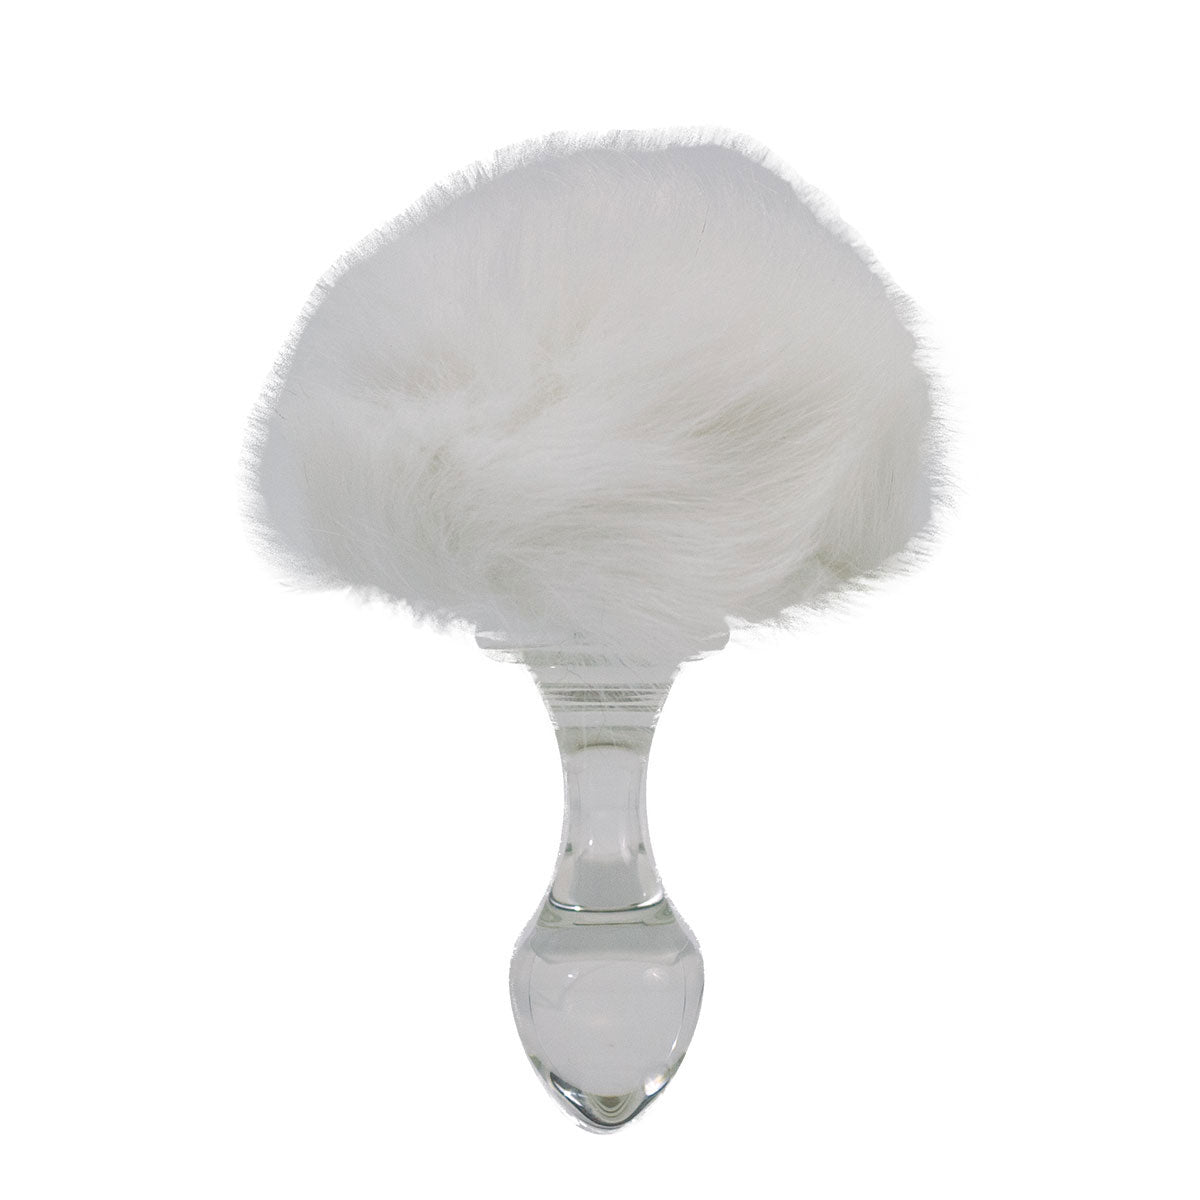 Crystal Delights Magnetic Bunny Tail White Plugs